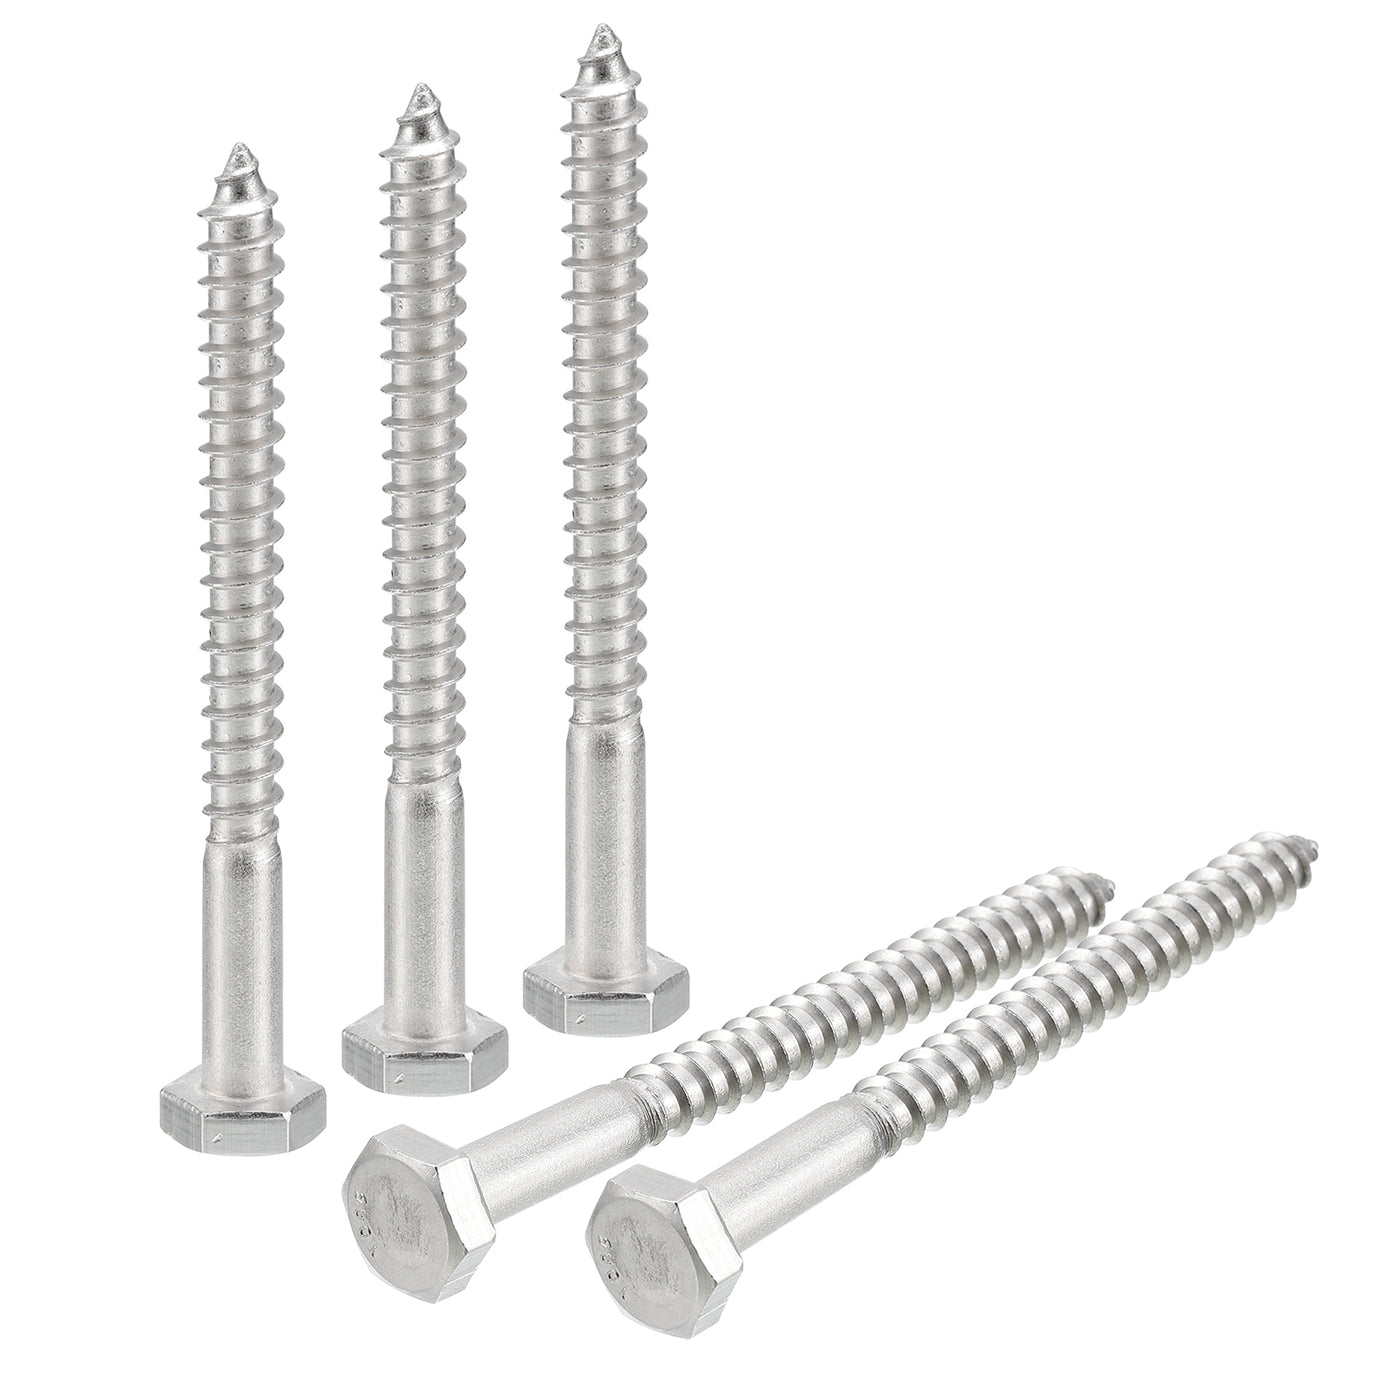 uxcell Uxcell Hex Head Lag Screws Bolts, 5pcs 1/4" x 3" 304 Stainless Steel Wood Screws